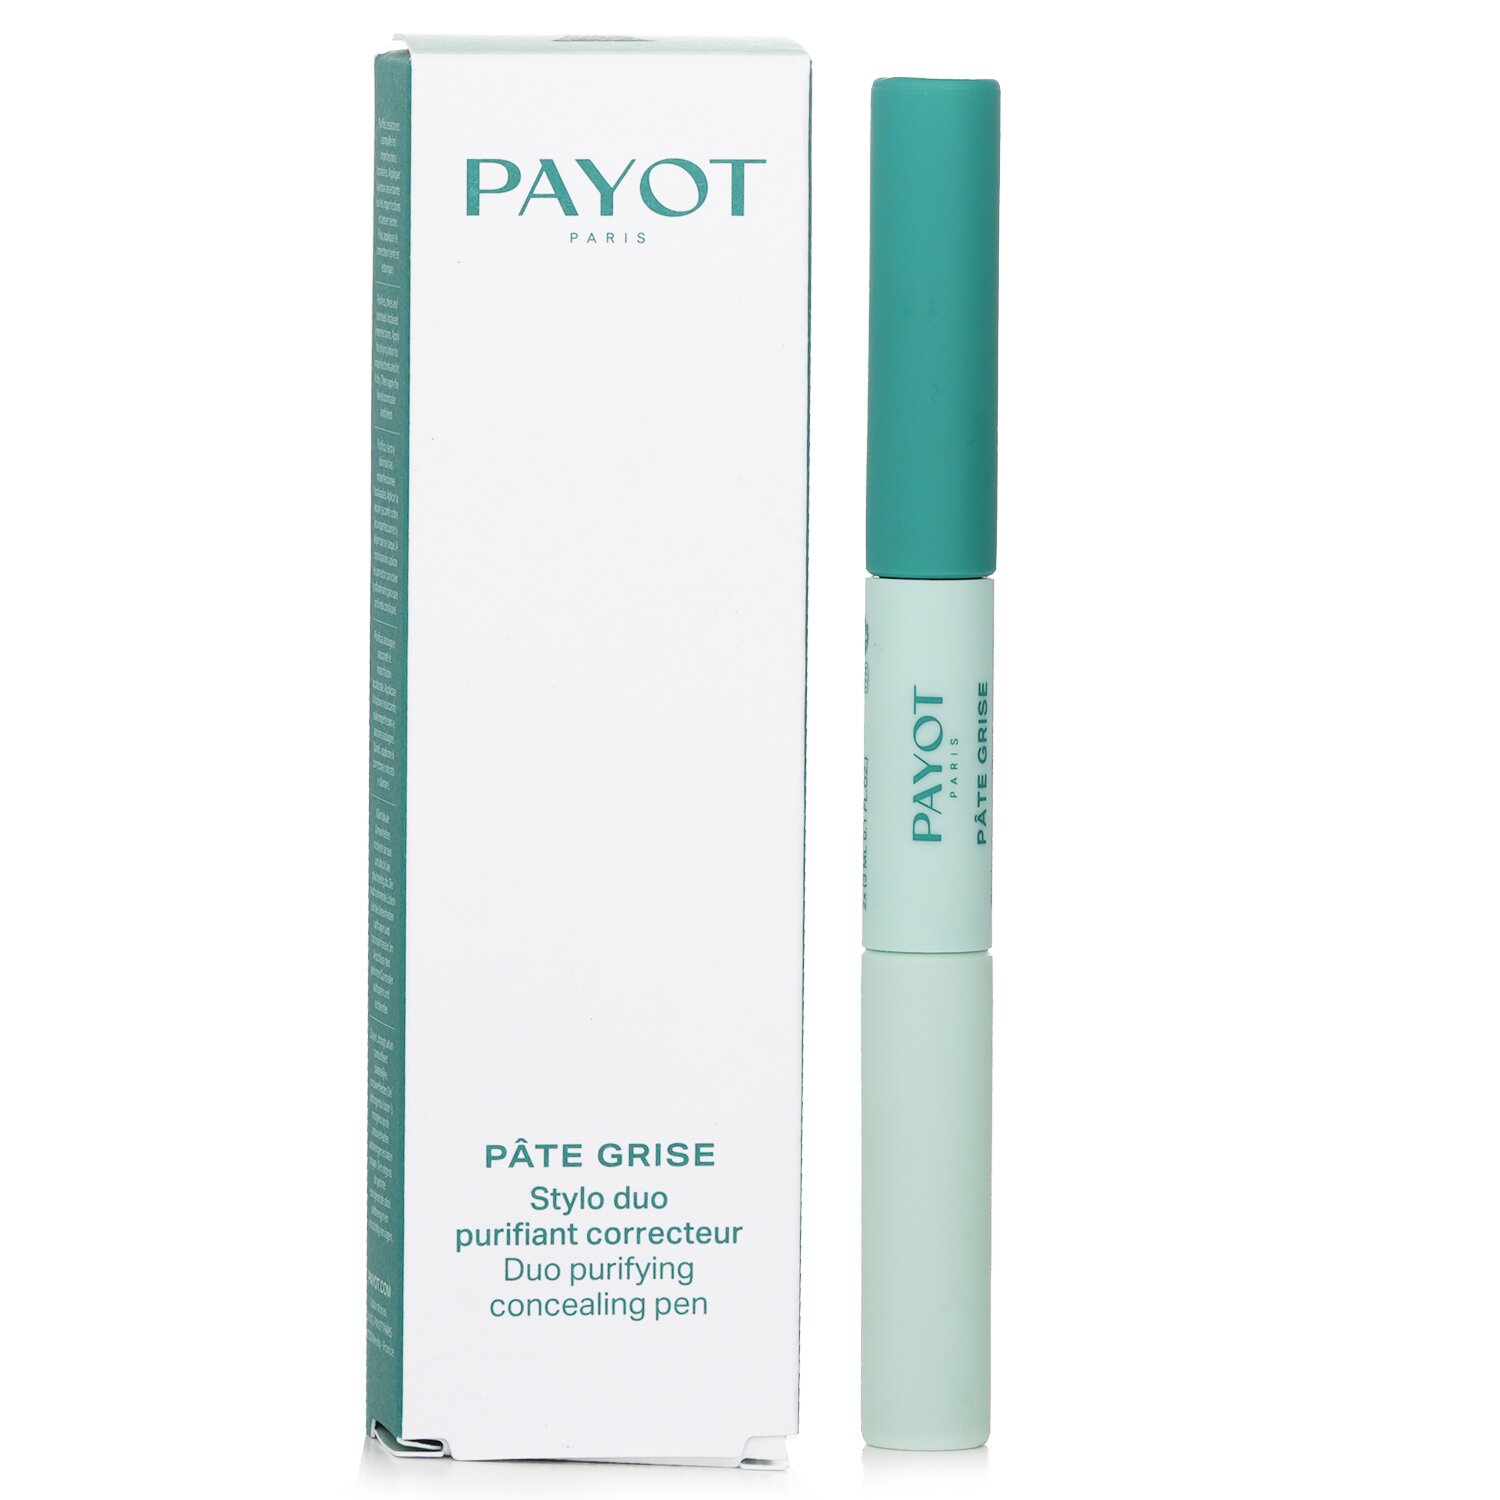 Payot Pâte Grise Duo Purifying Concealing Pen - 30ml